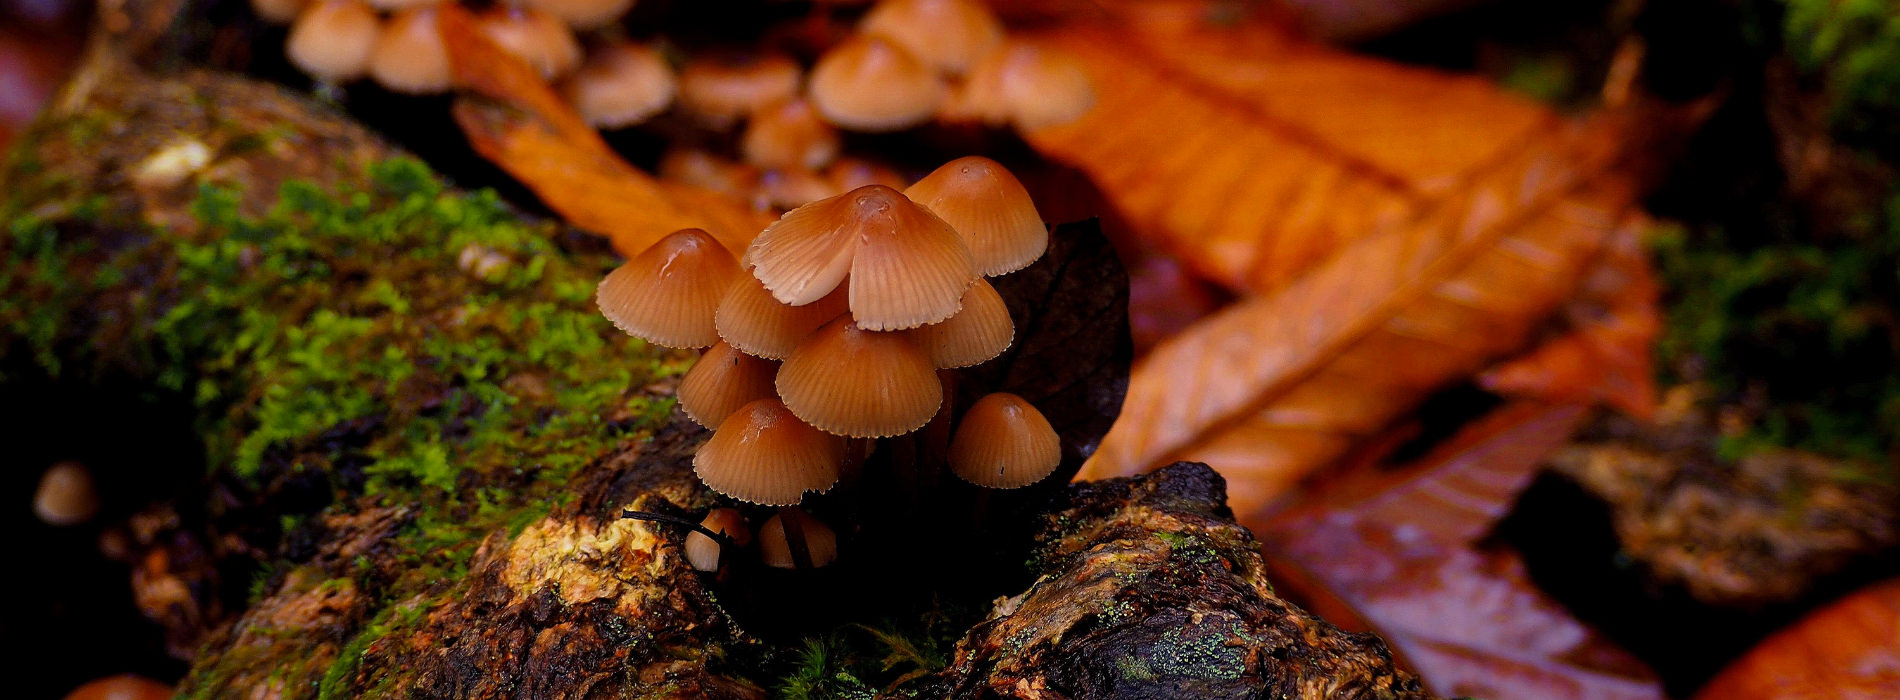 Mushrooms grow on the floor of a forest